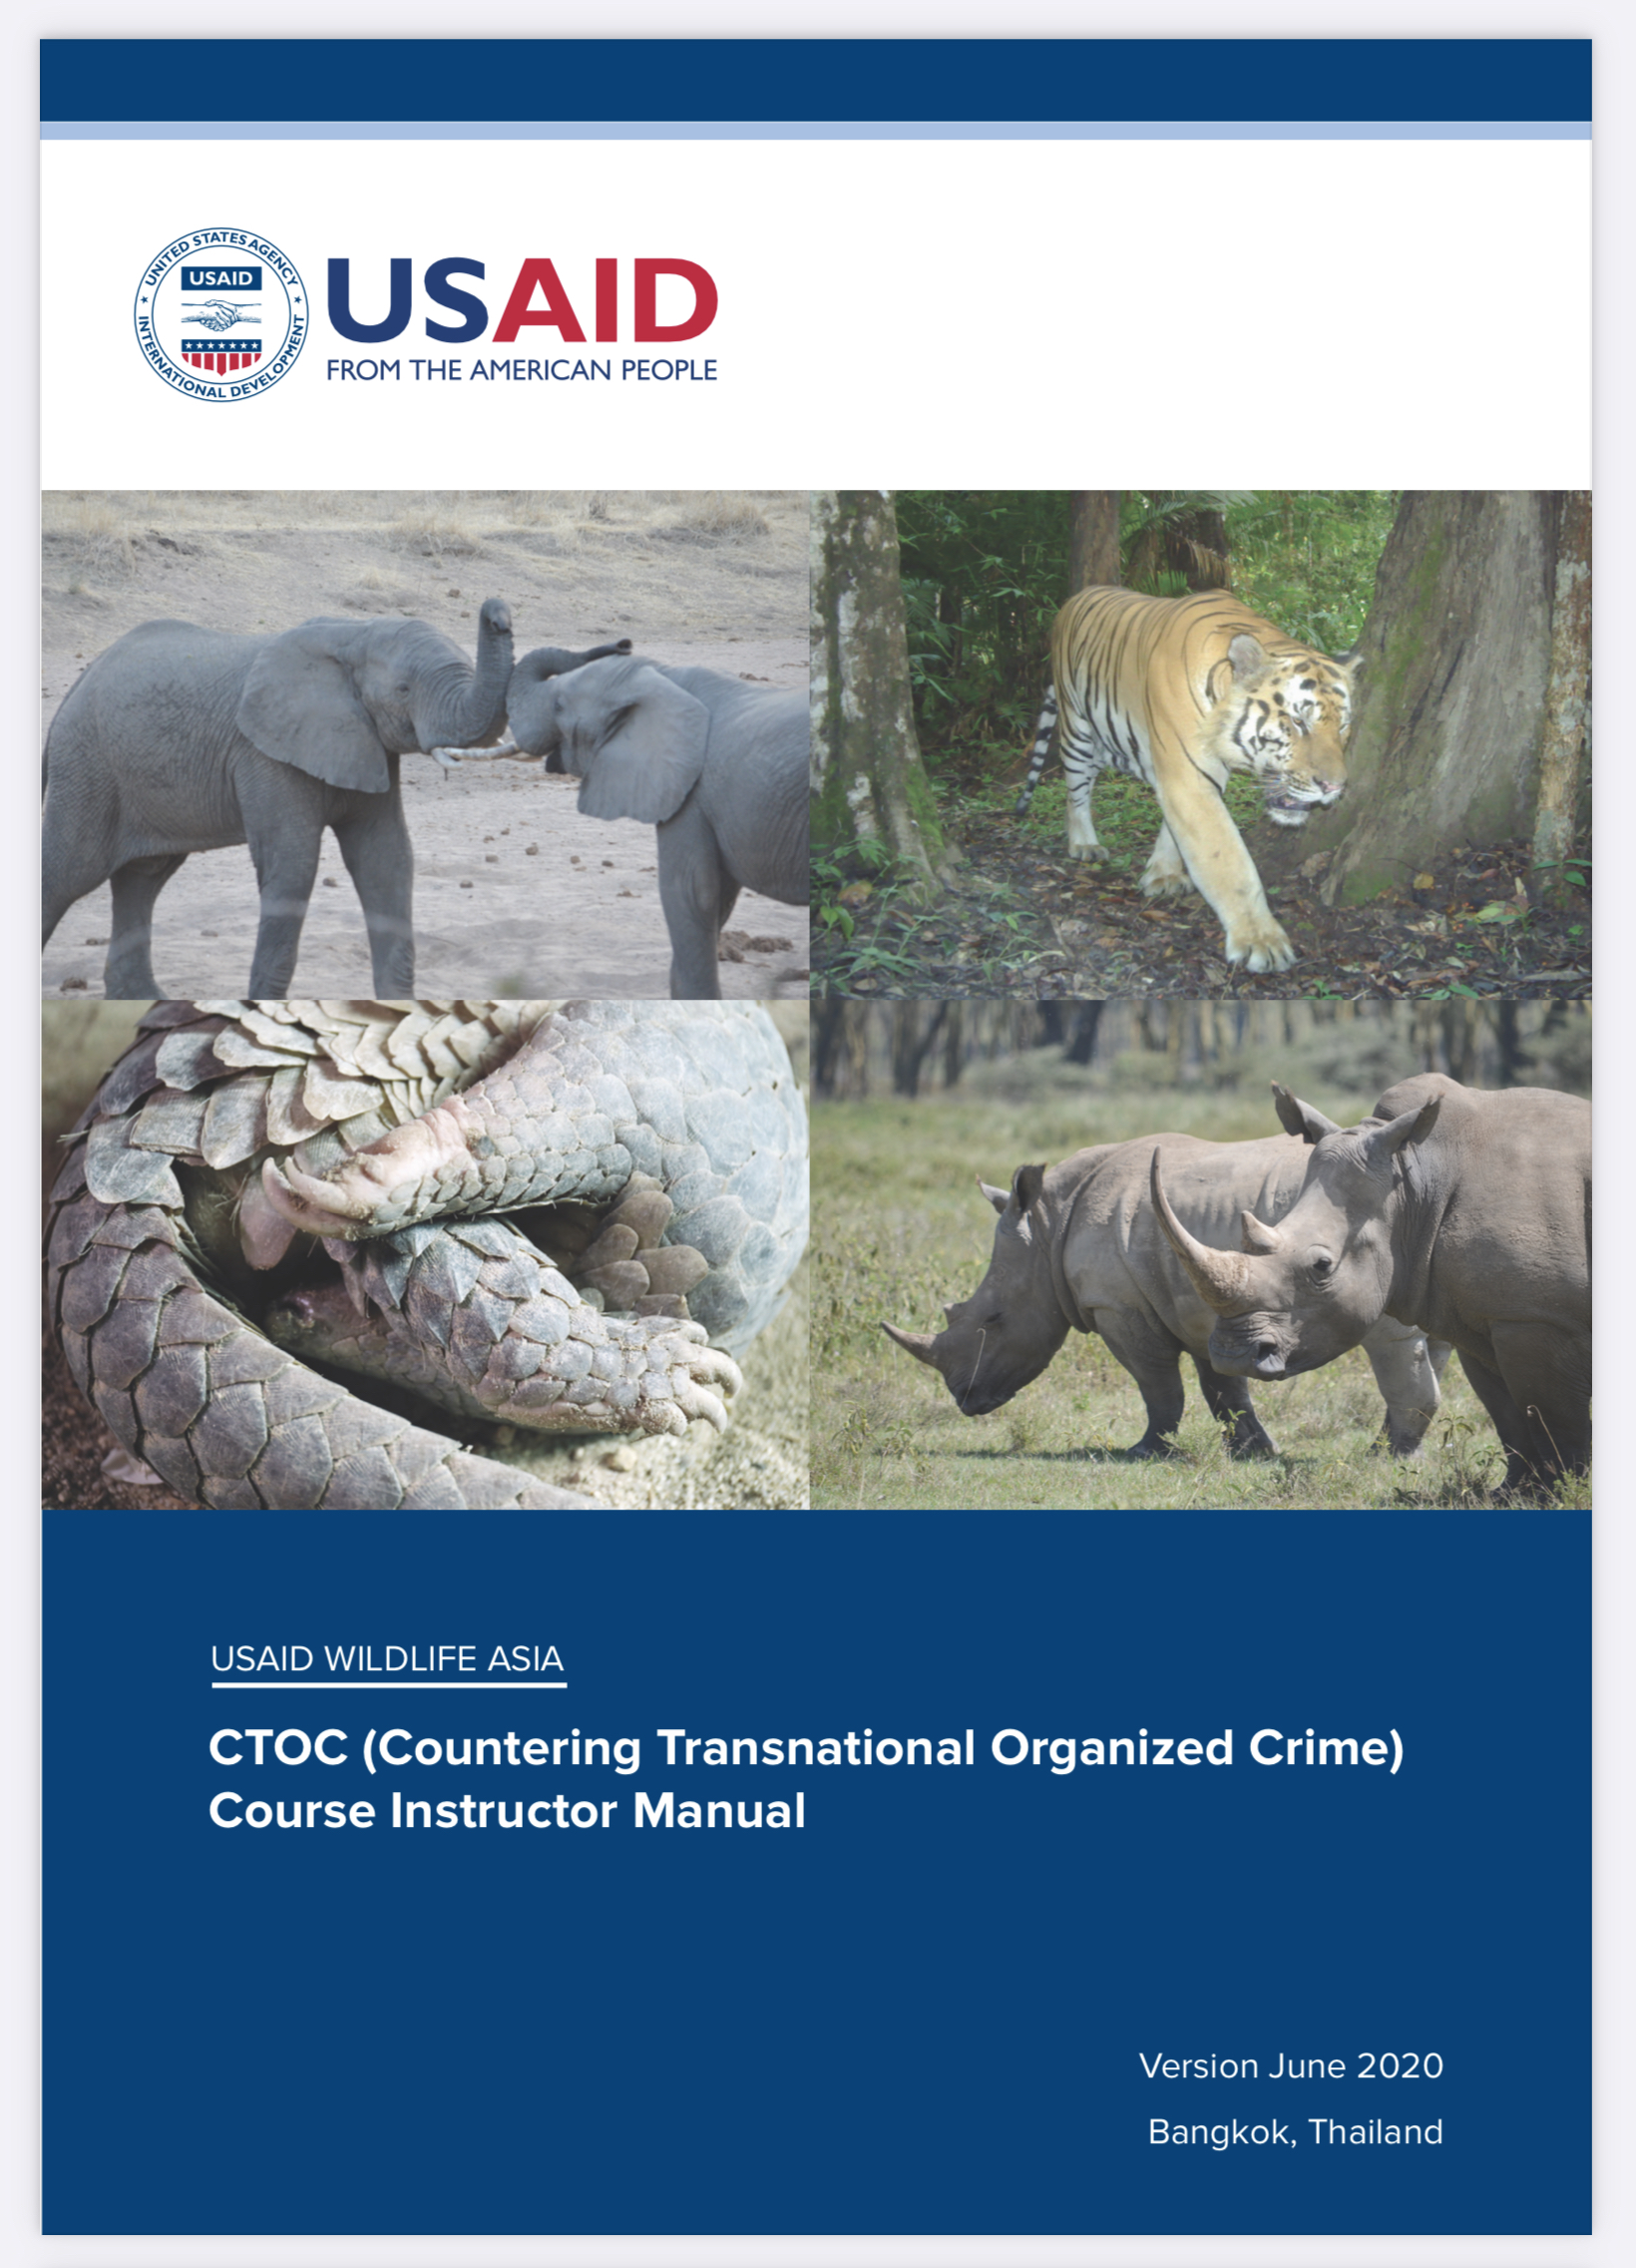 CTOC Course Instructor Manual